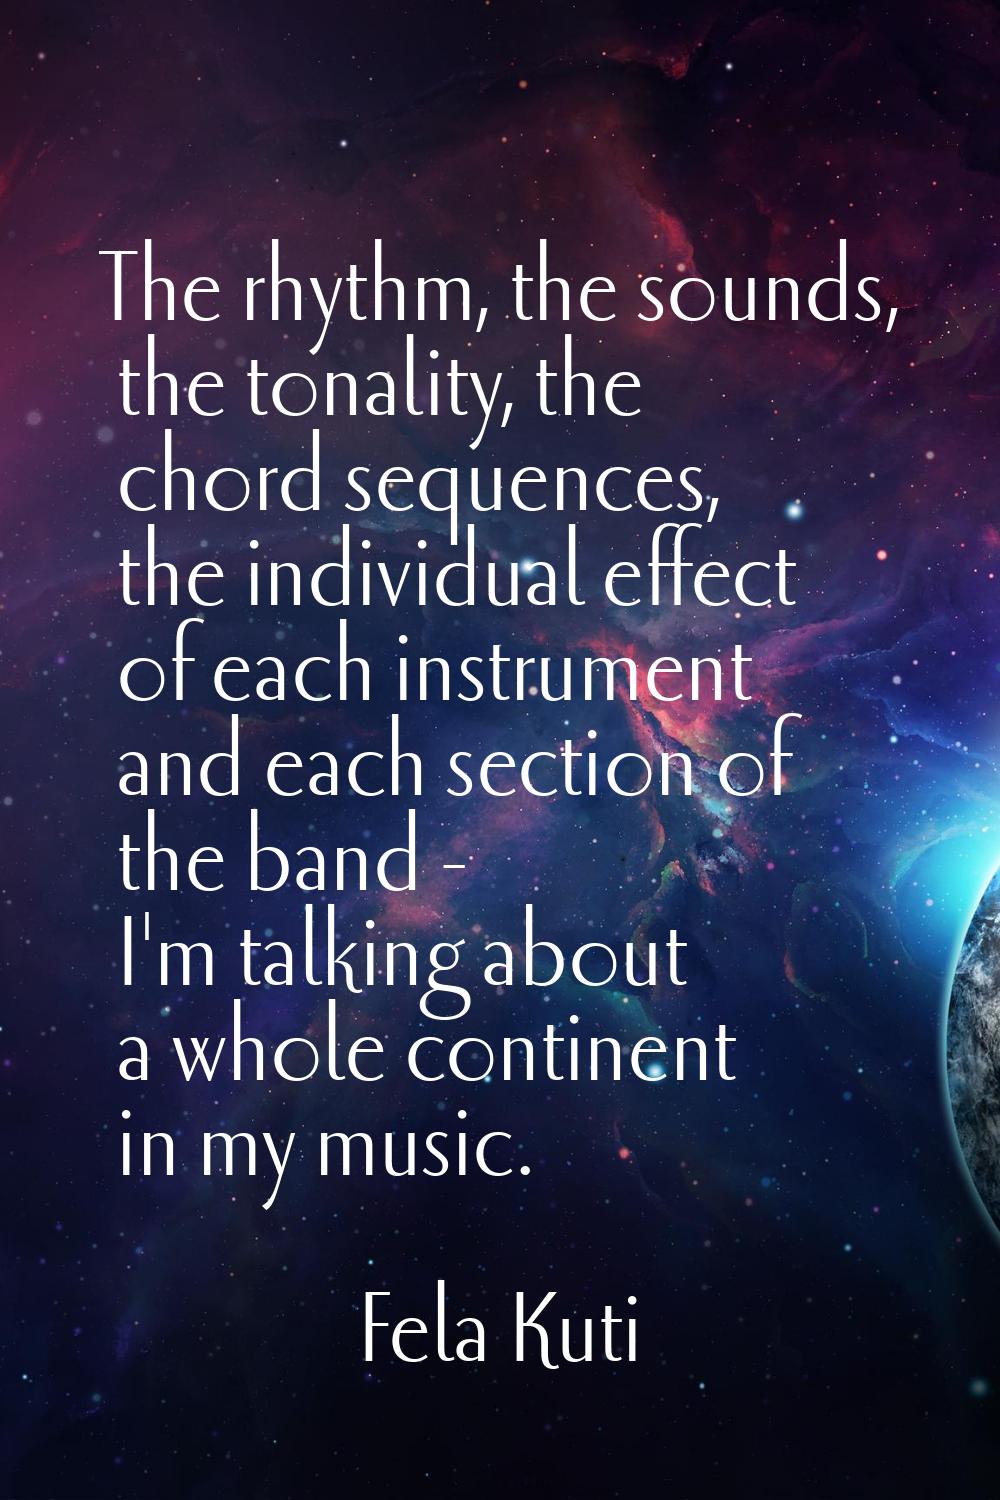 The rhythm, the sounds, the tonality, the chord sequences, the individual effect of each instrument